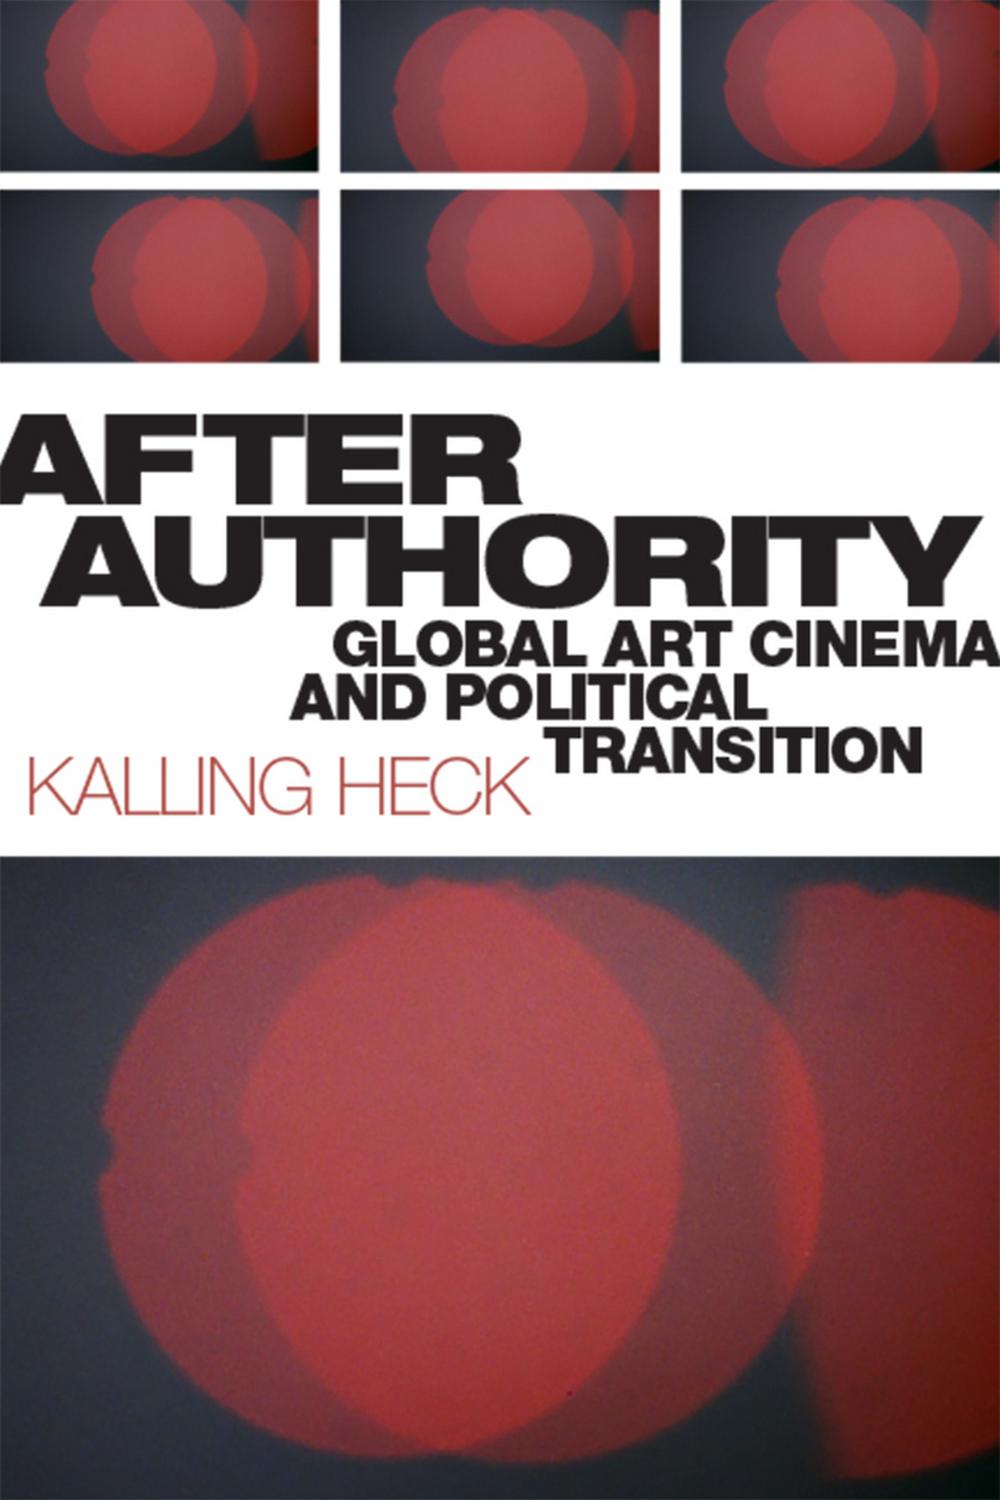 After Authority - Kalling Heck